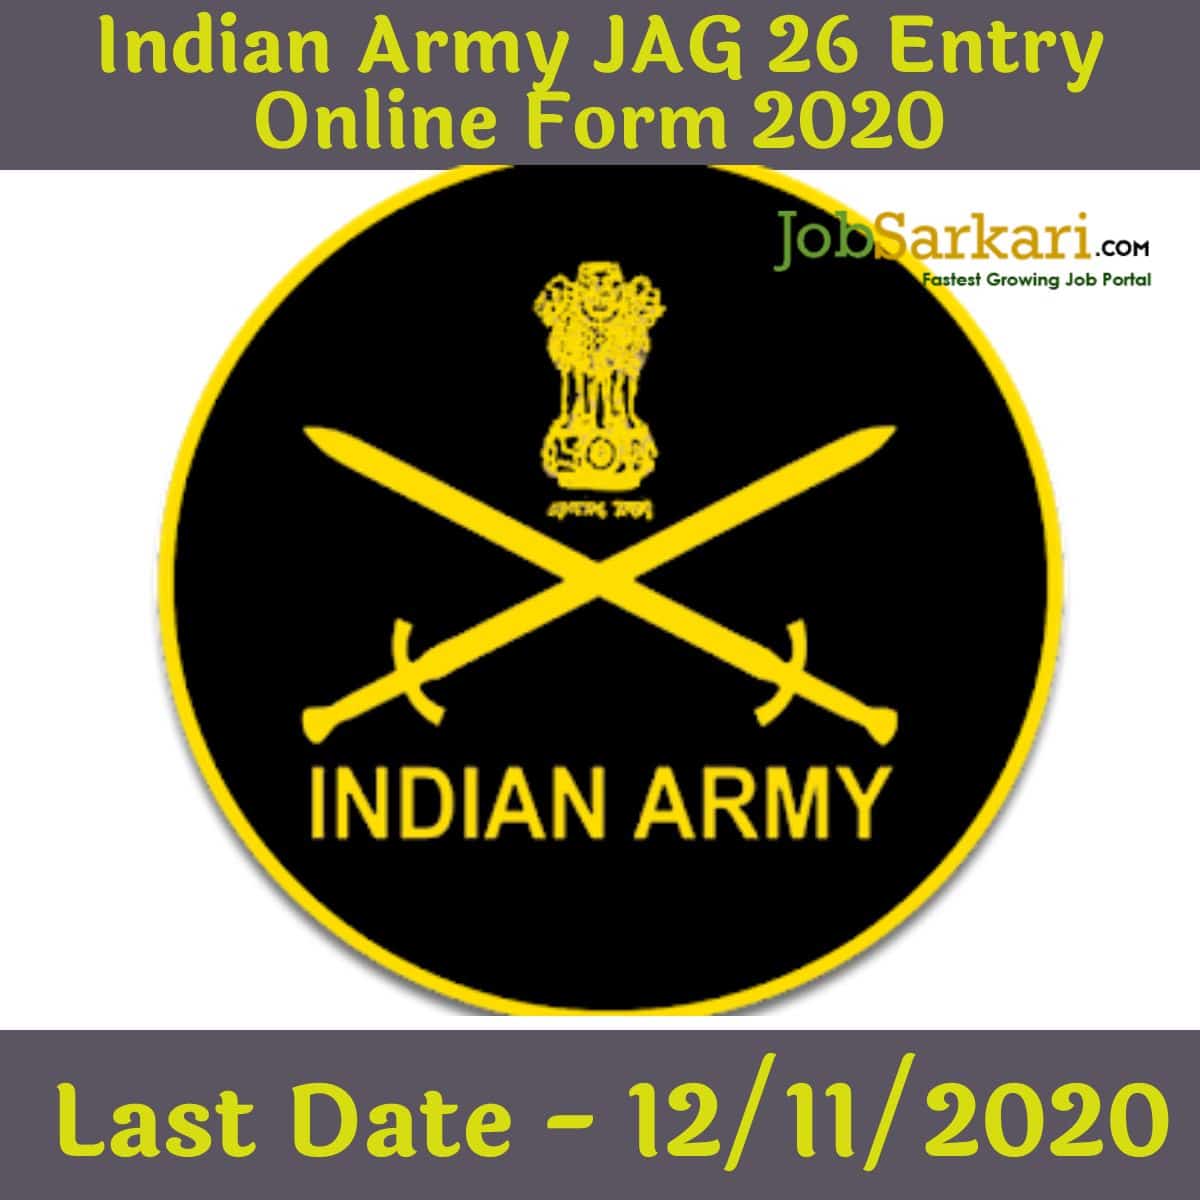 Indian Army JAG 26 Entry Online Form 2020